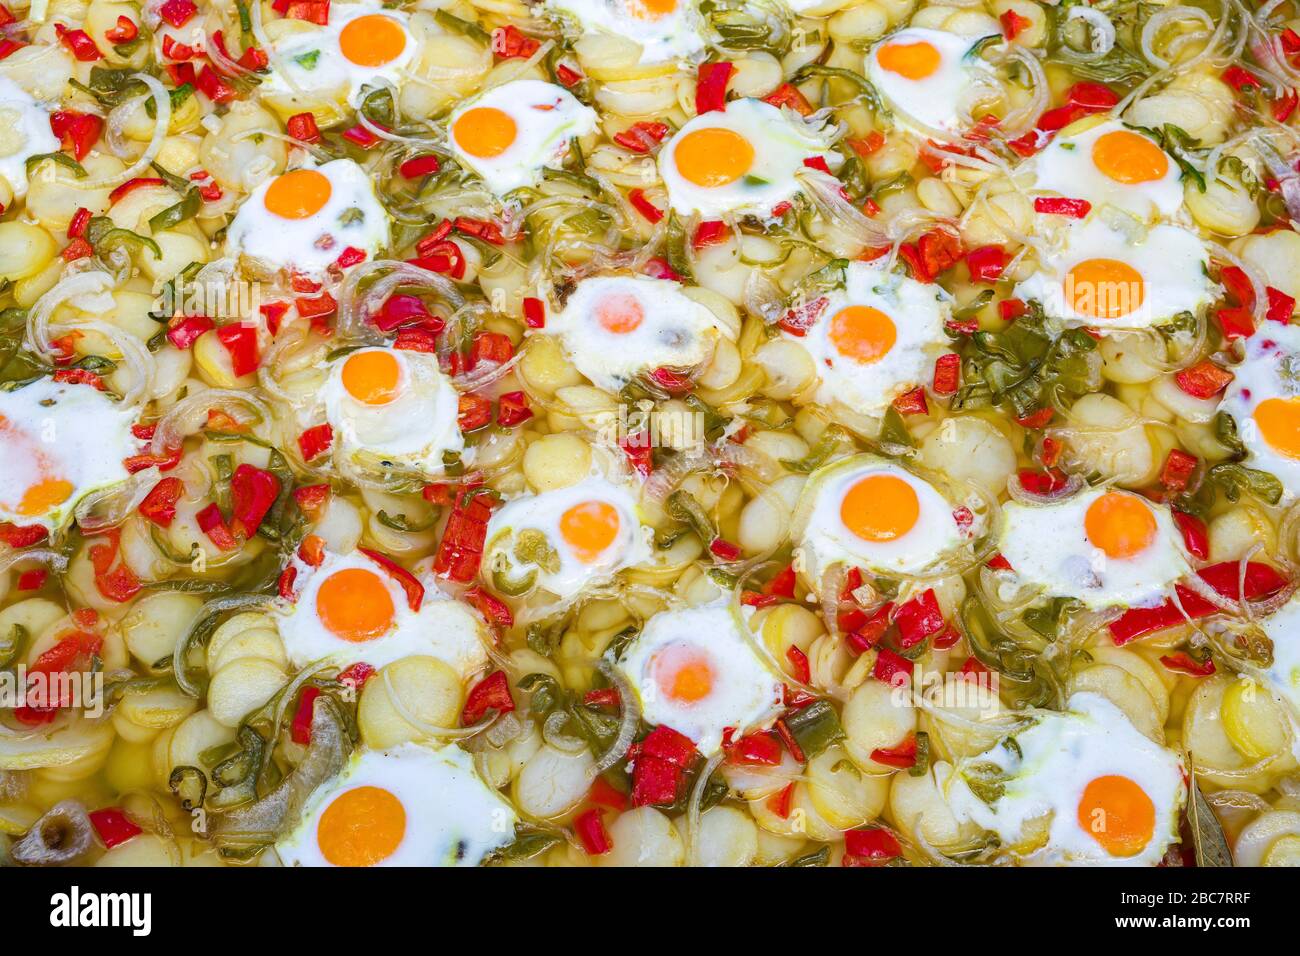 https://c8.alamy.com/comp/2BC7RRF/mixed-vegetables-and-eggs-cooked-in-a-big-pan-2BC7RRF.jpg